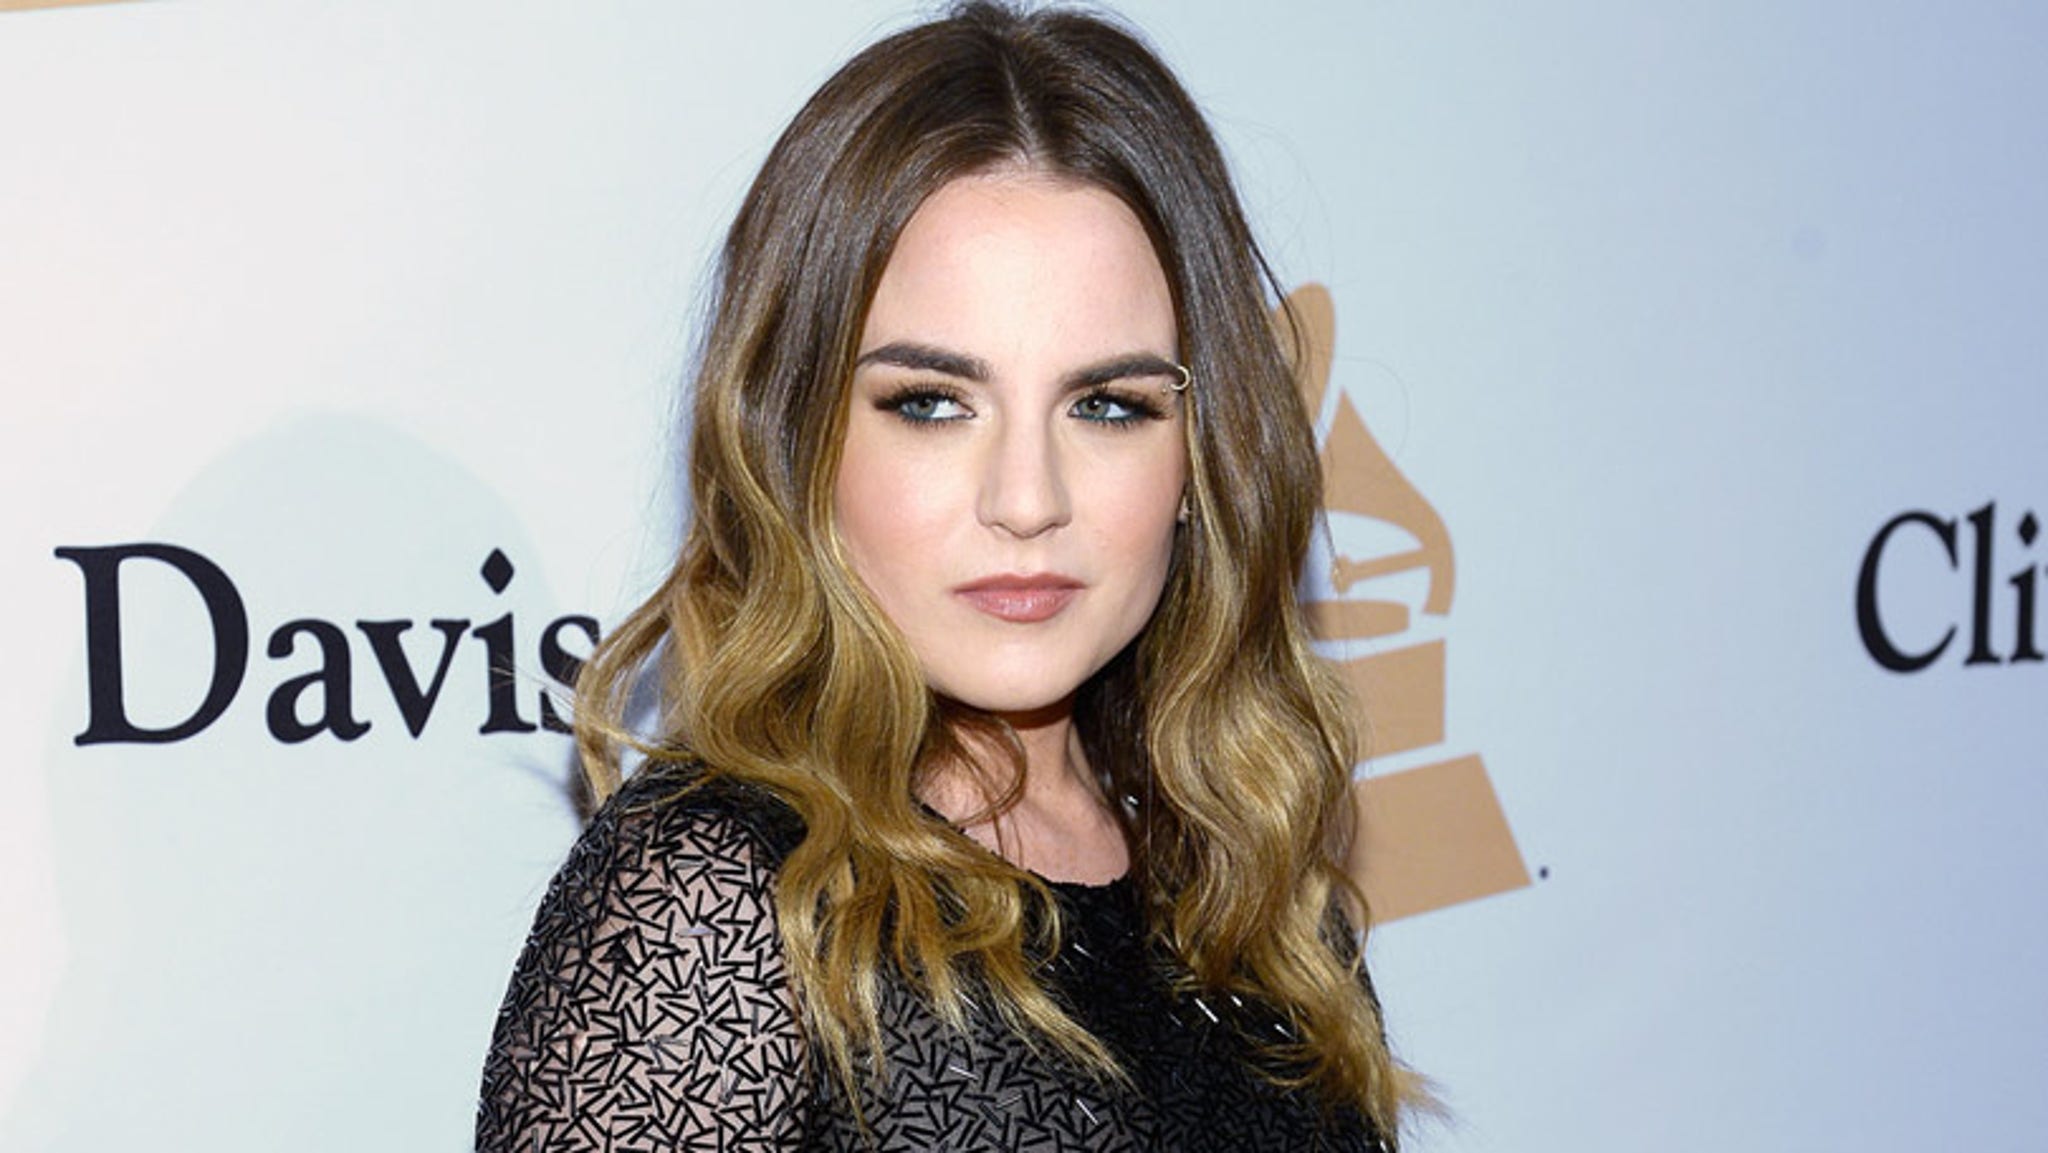 Jojo Talks Pressures To Stay Thin Says She Was Injecting Herself To Lose Weight